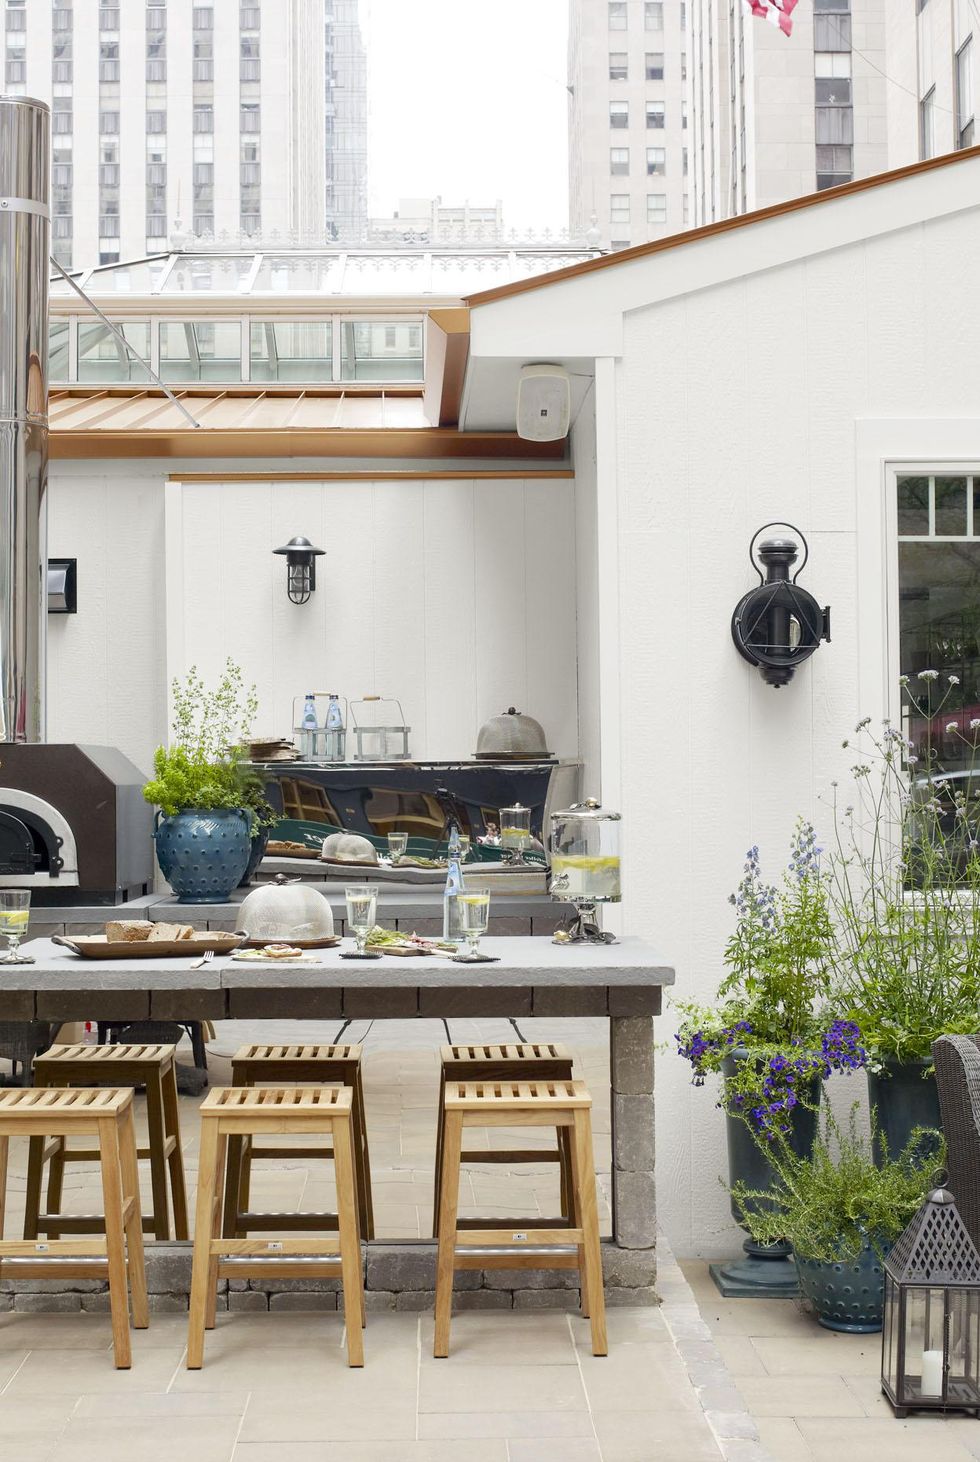 Building an Outdoor Kitchen - 10 Things to Know First